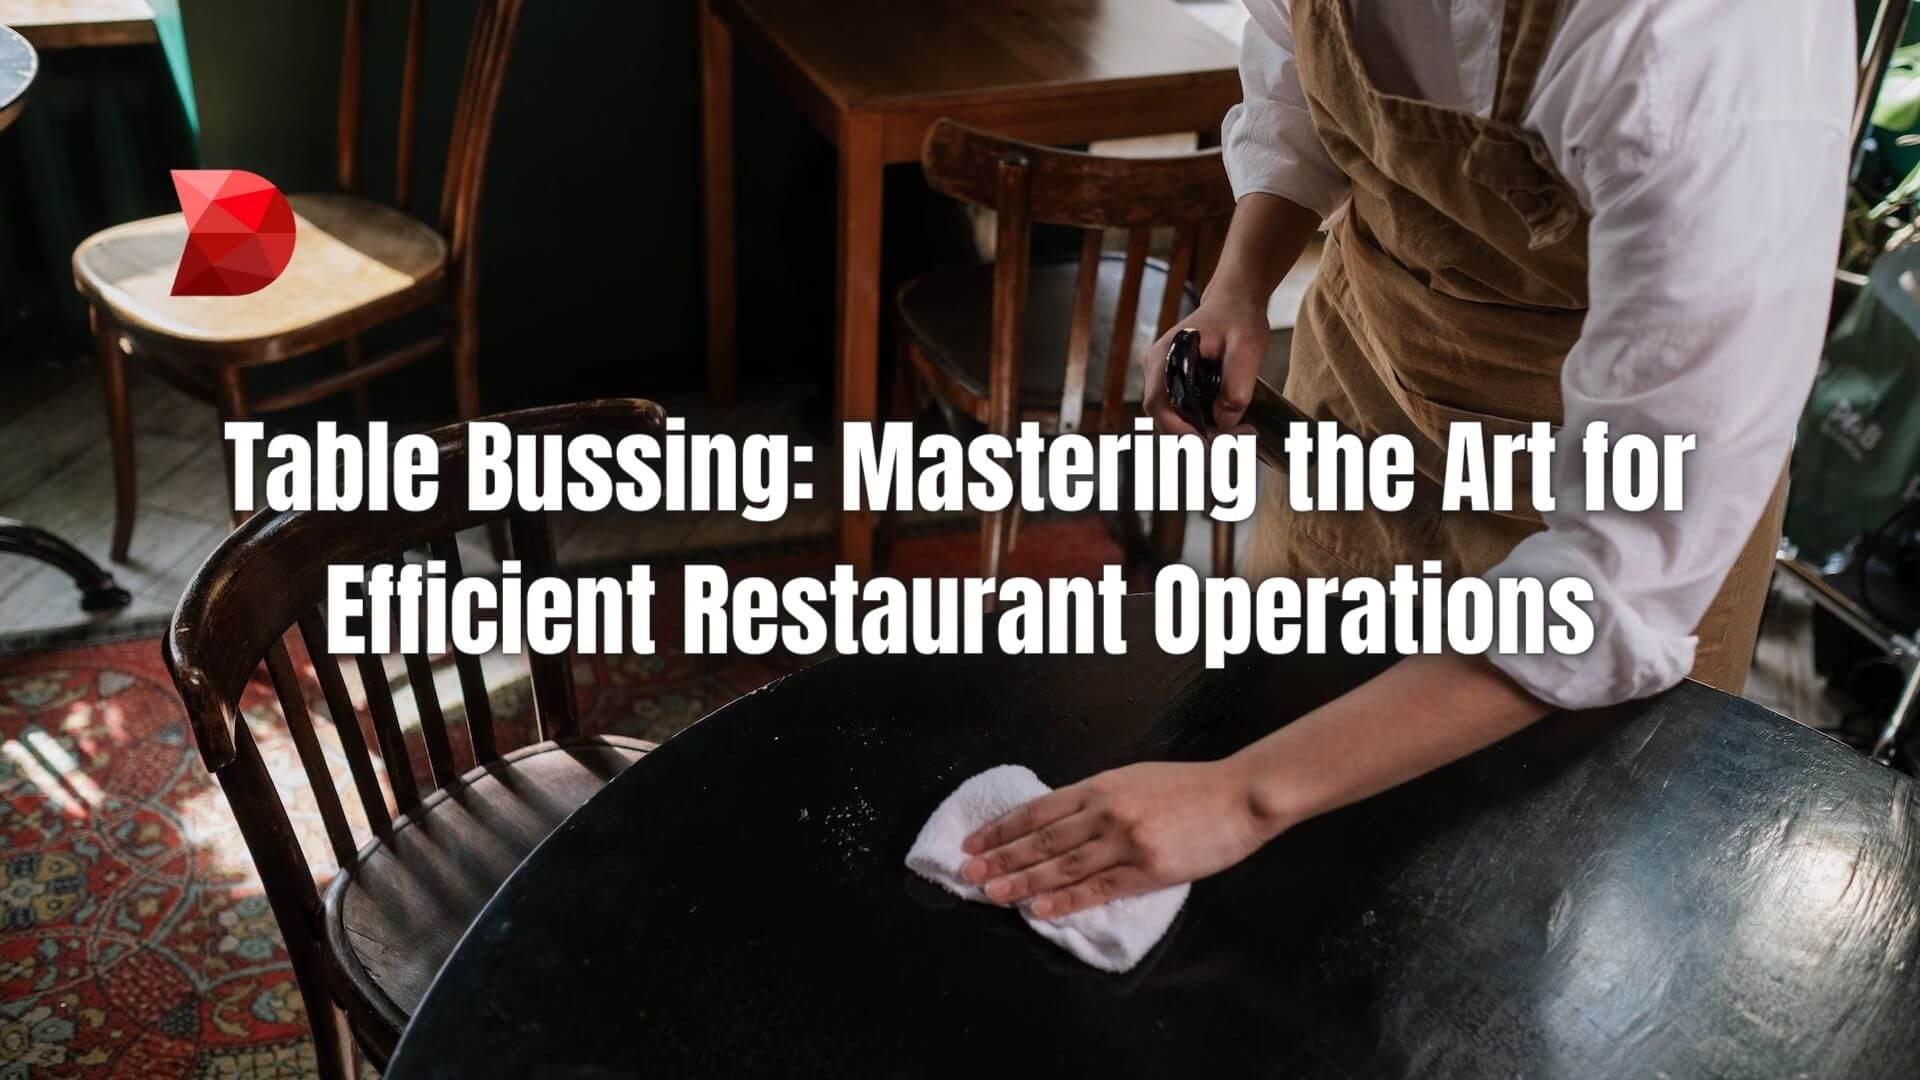 Efficiently manage restaurant operations! Learn the art of table bussing with this guide. Click here to elevate your service standards today.